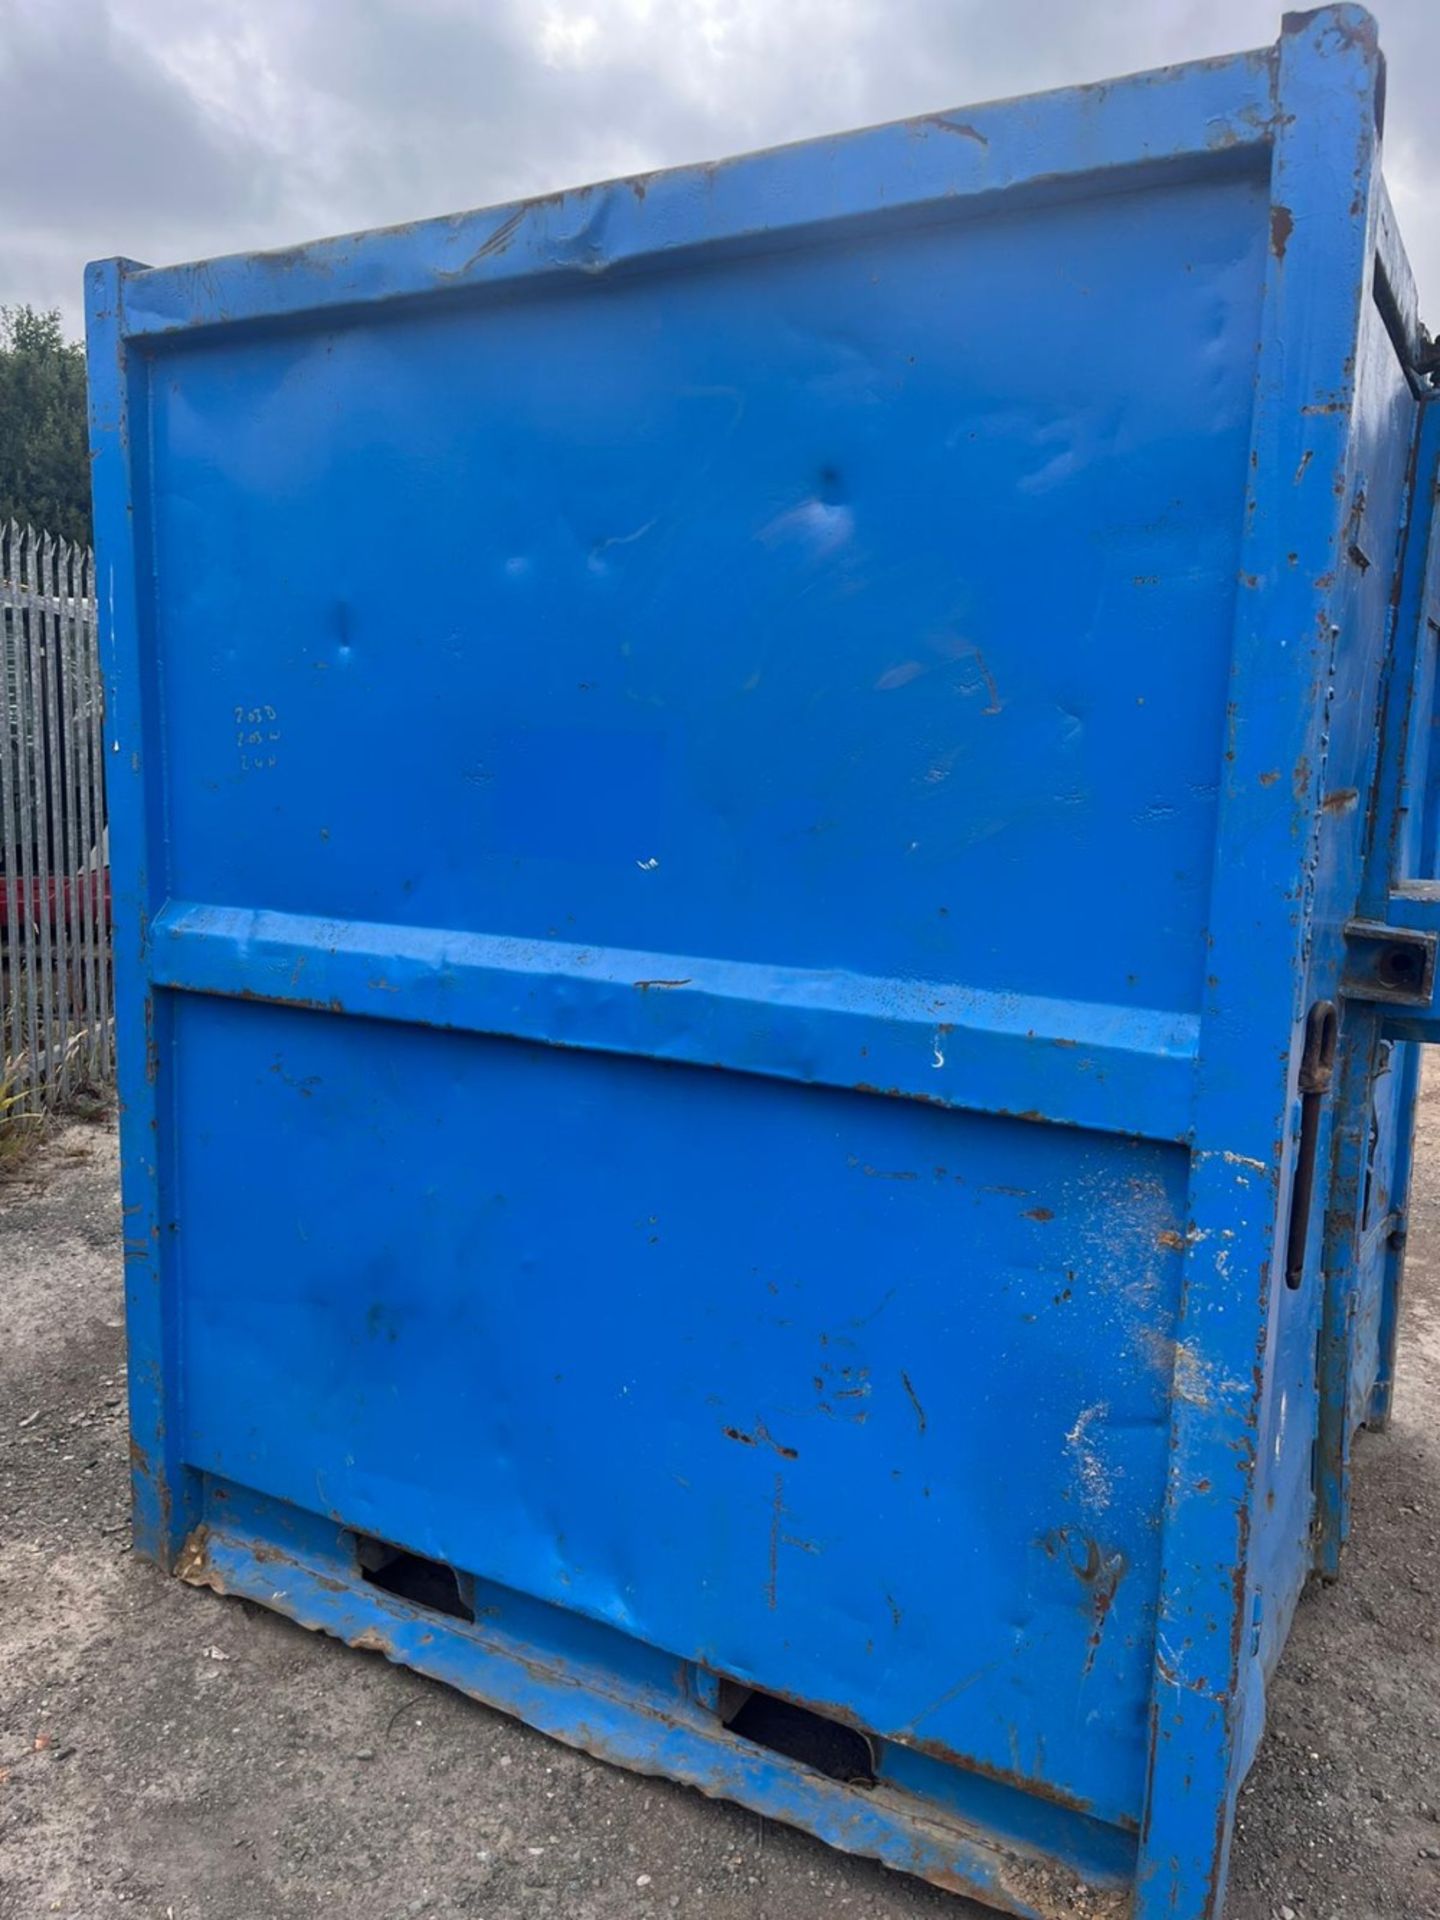 SECURE CHAIN LIFT STORAGE CONTAINER 3X1.75 METRE C.W KEY - Image 3 of 5